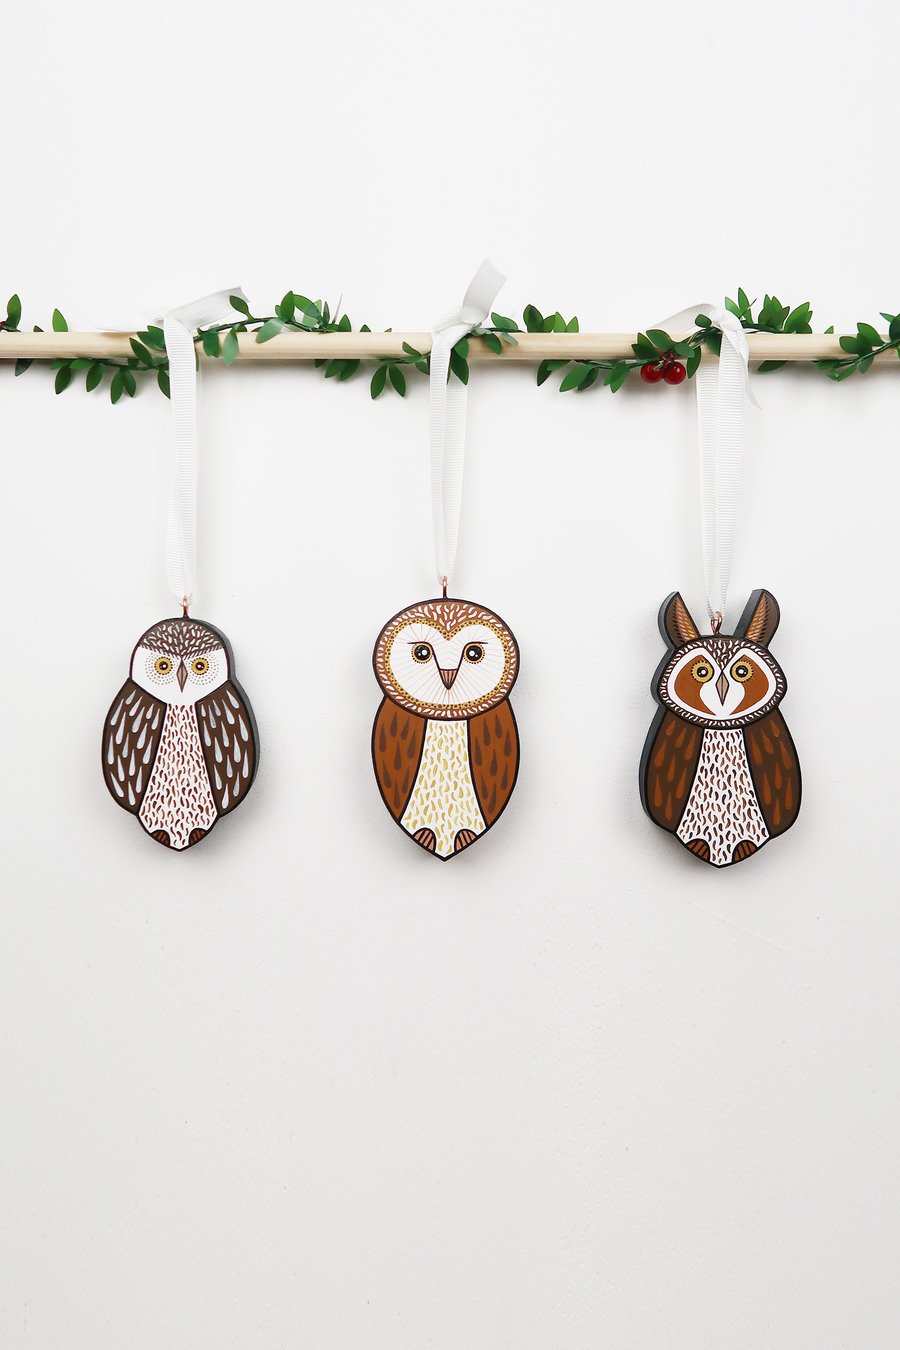 Owl hanging ornaments, set of 3 decorations for Christmas tree.